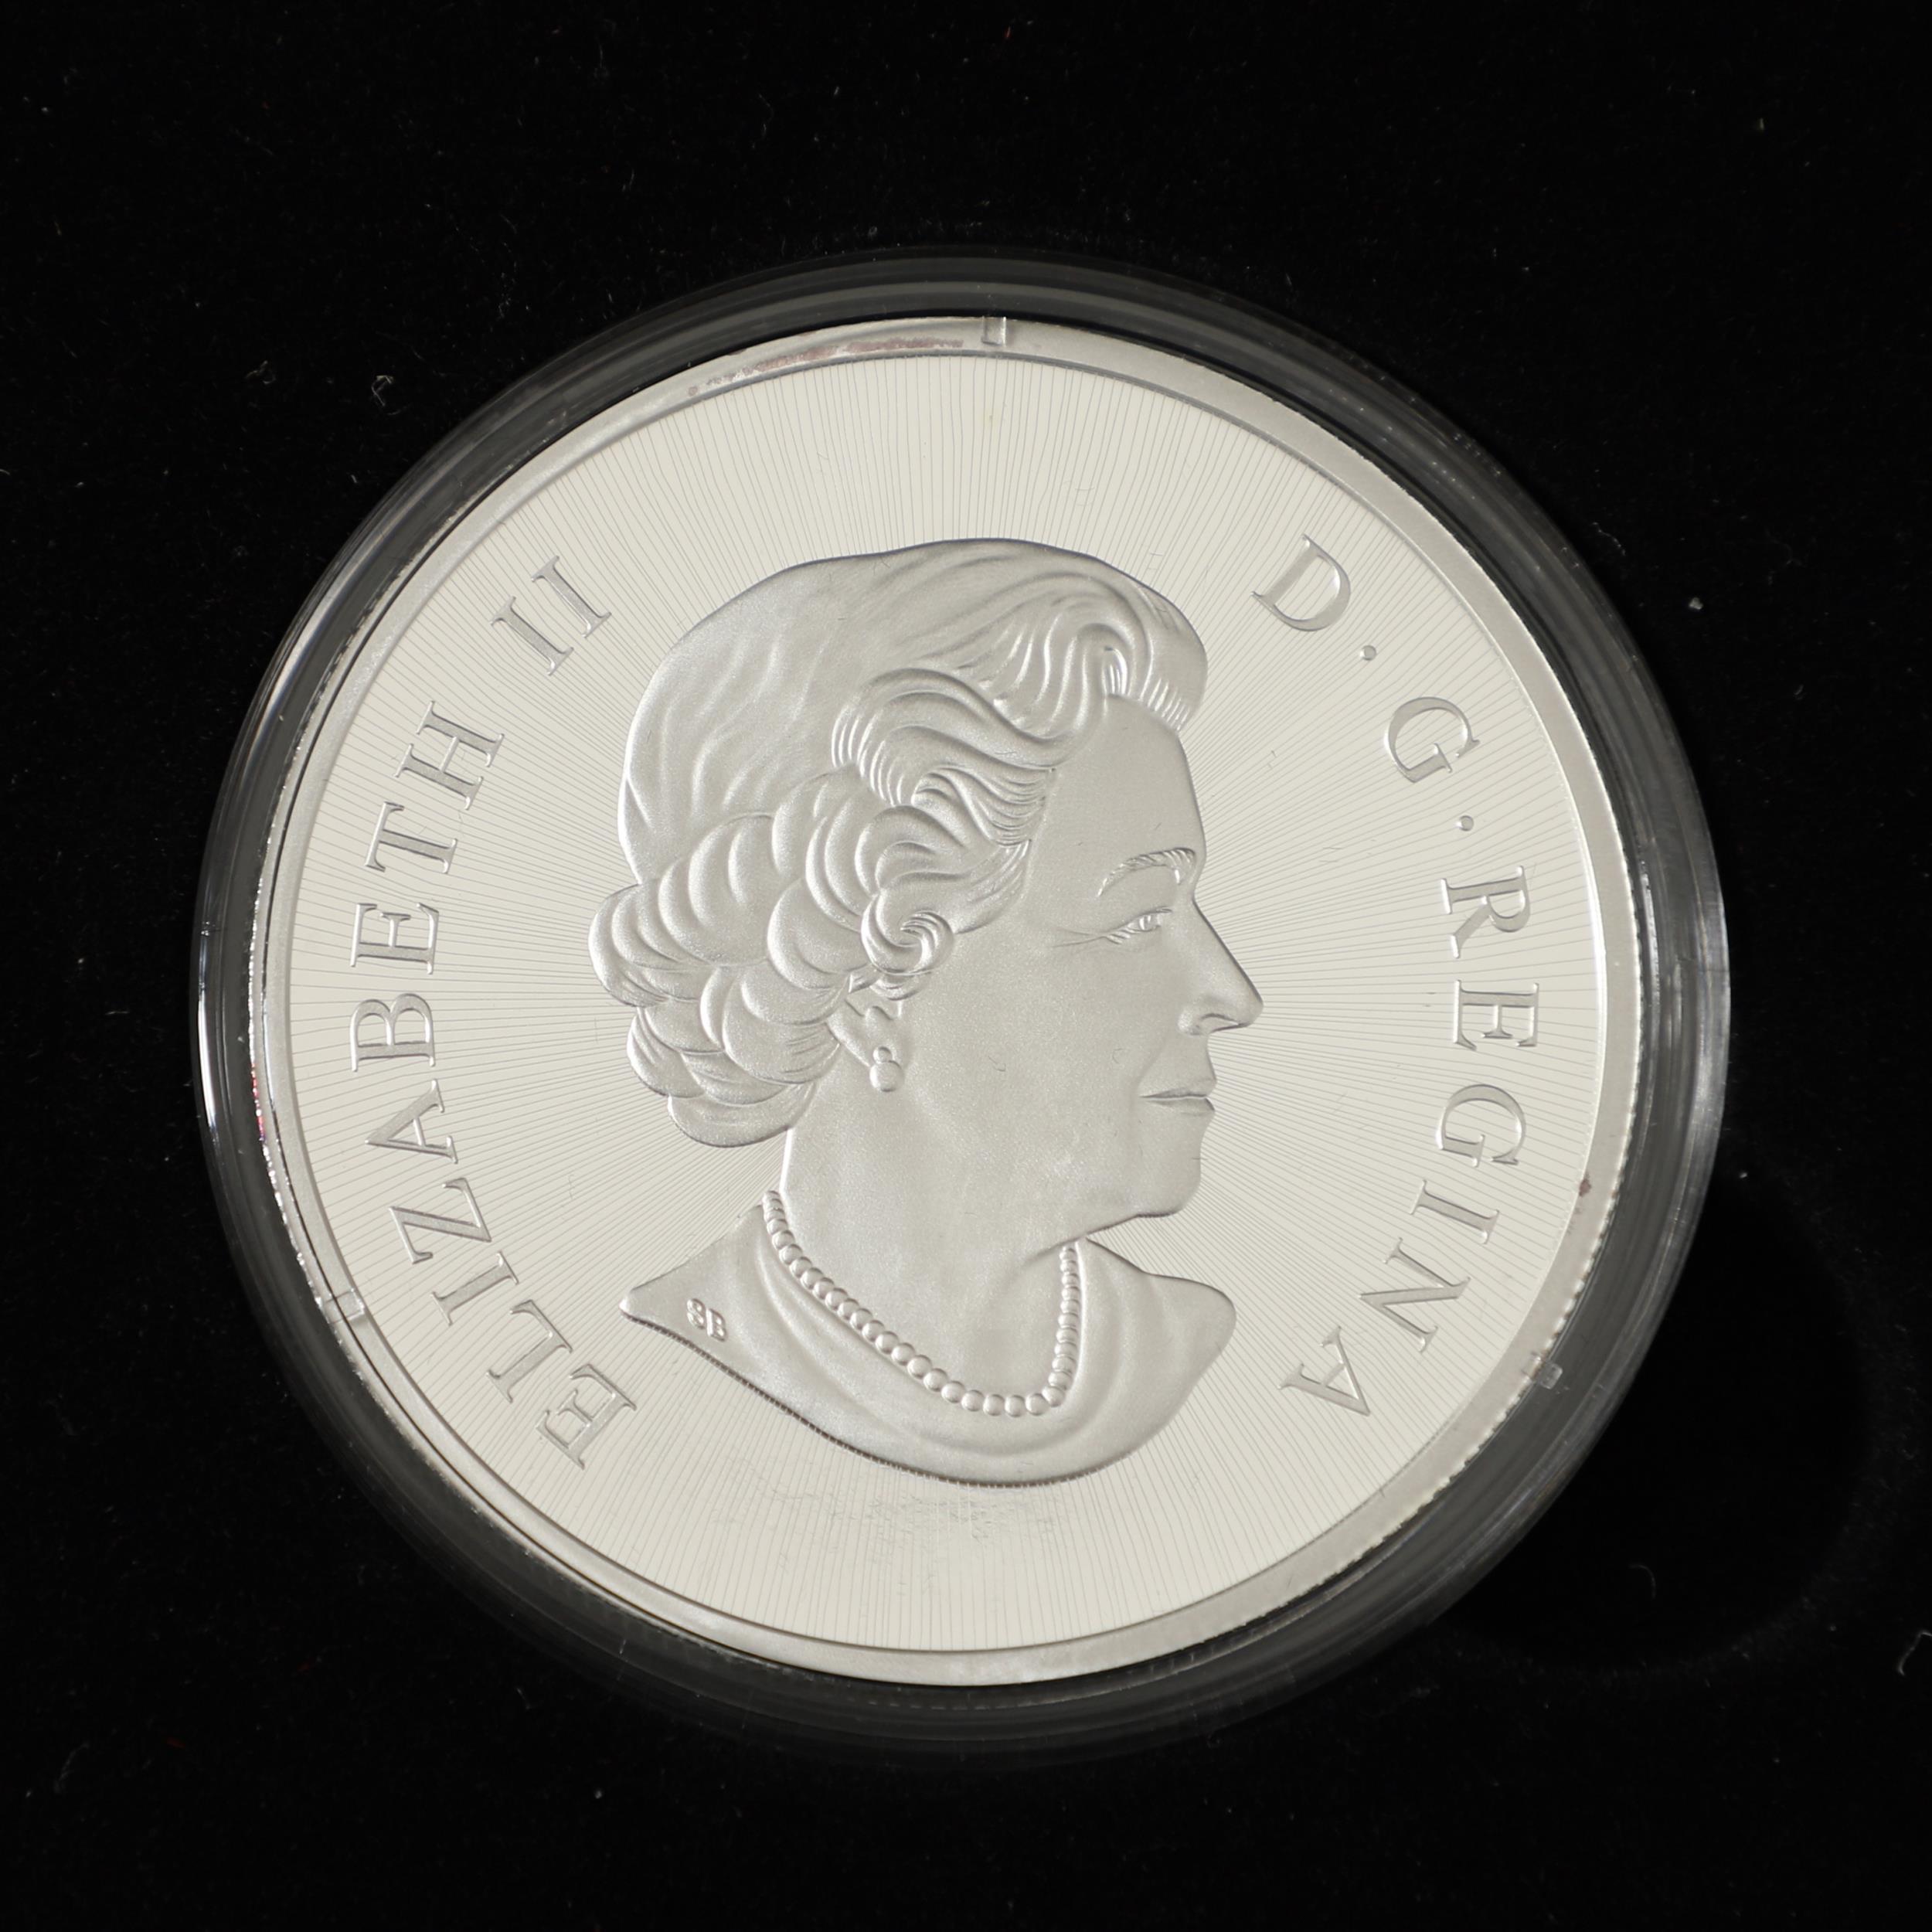 AN ELIZABETH II ROYAL CANADIAN MINT SILVER FIVE COIN 'MAPLE MASTERS' COLLECTION. 2019. - Bild 3 aus 15